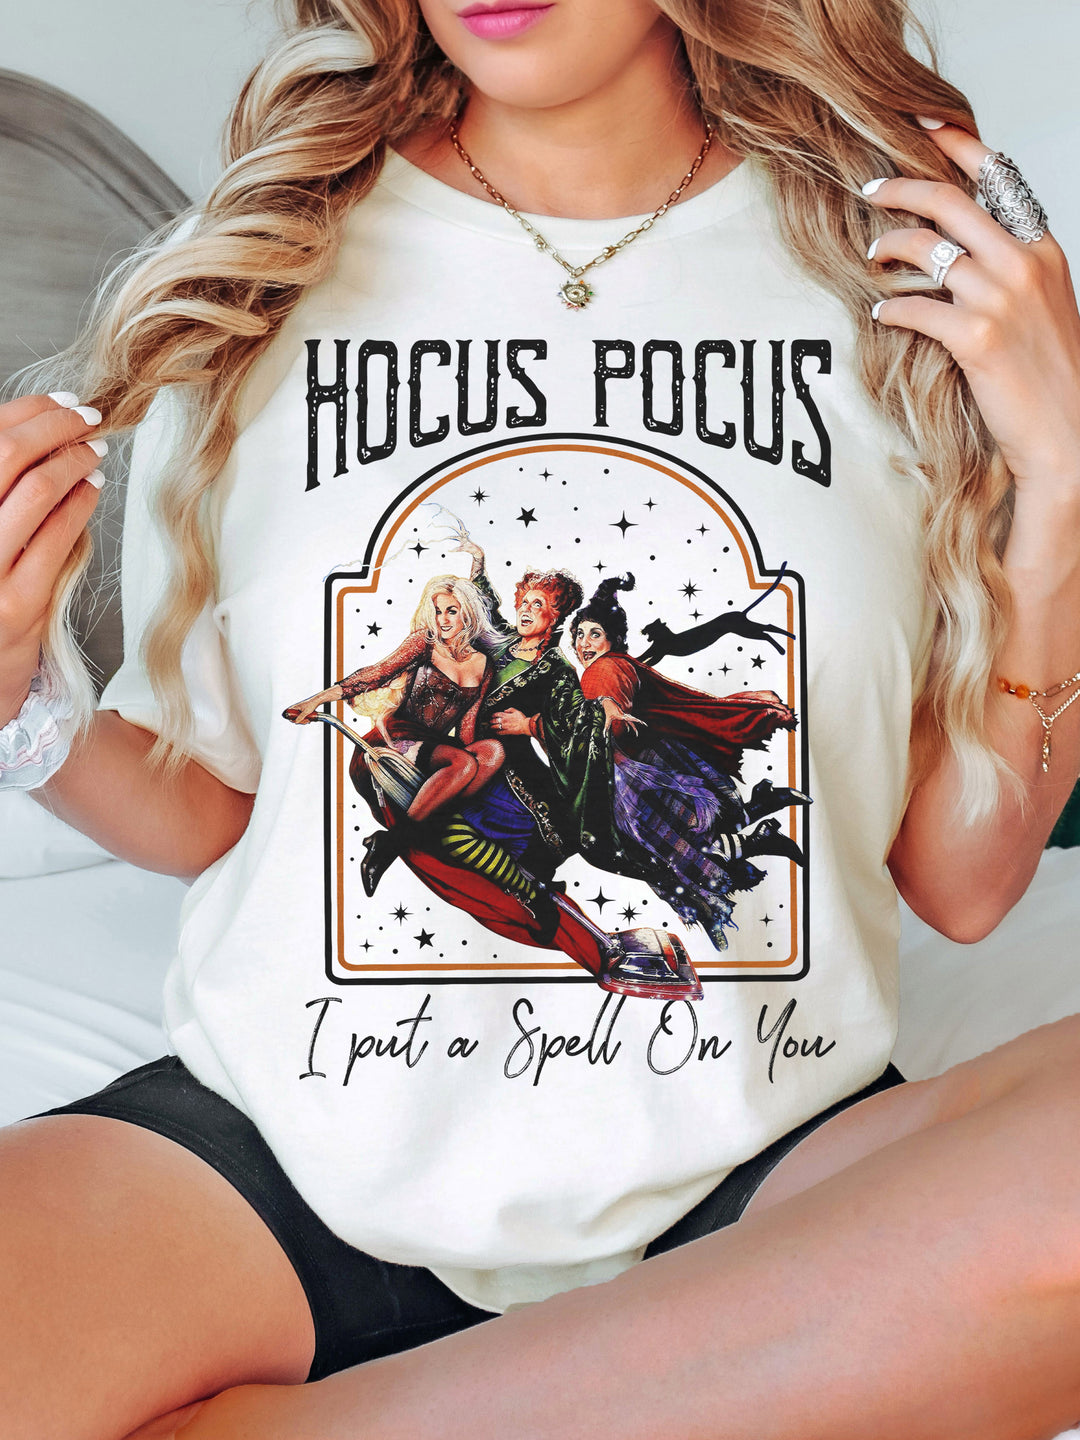 Glamfox - Hocus Pocus I Put On A Spell On You Graphic Top